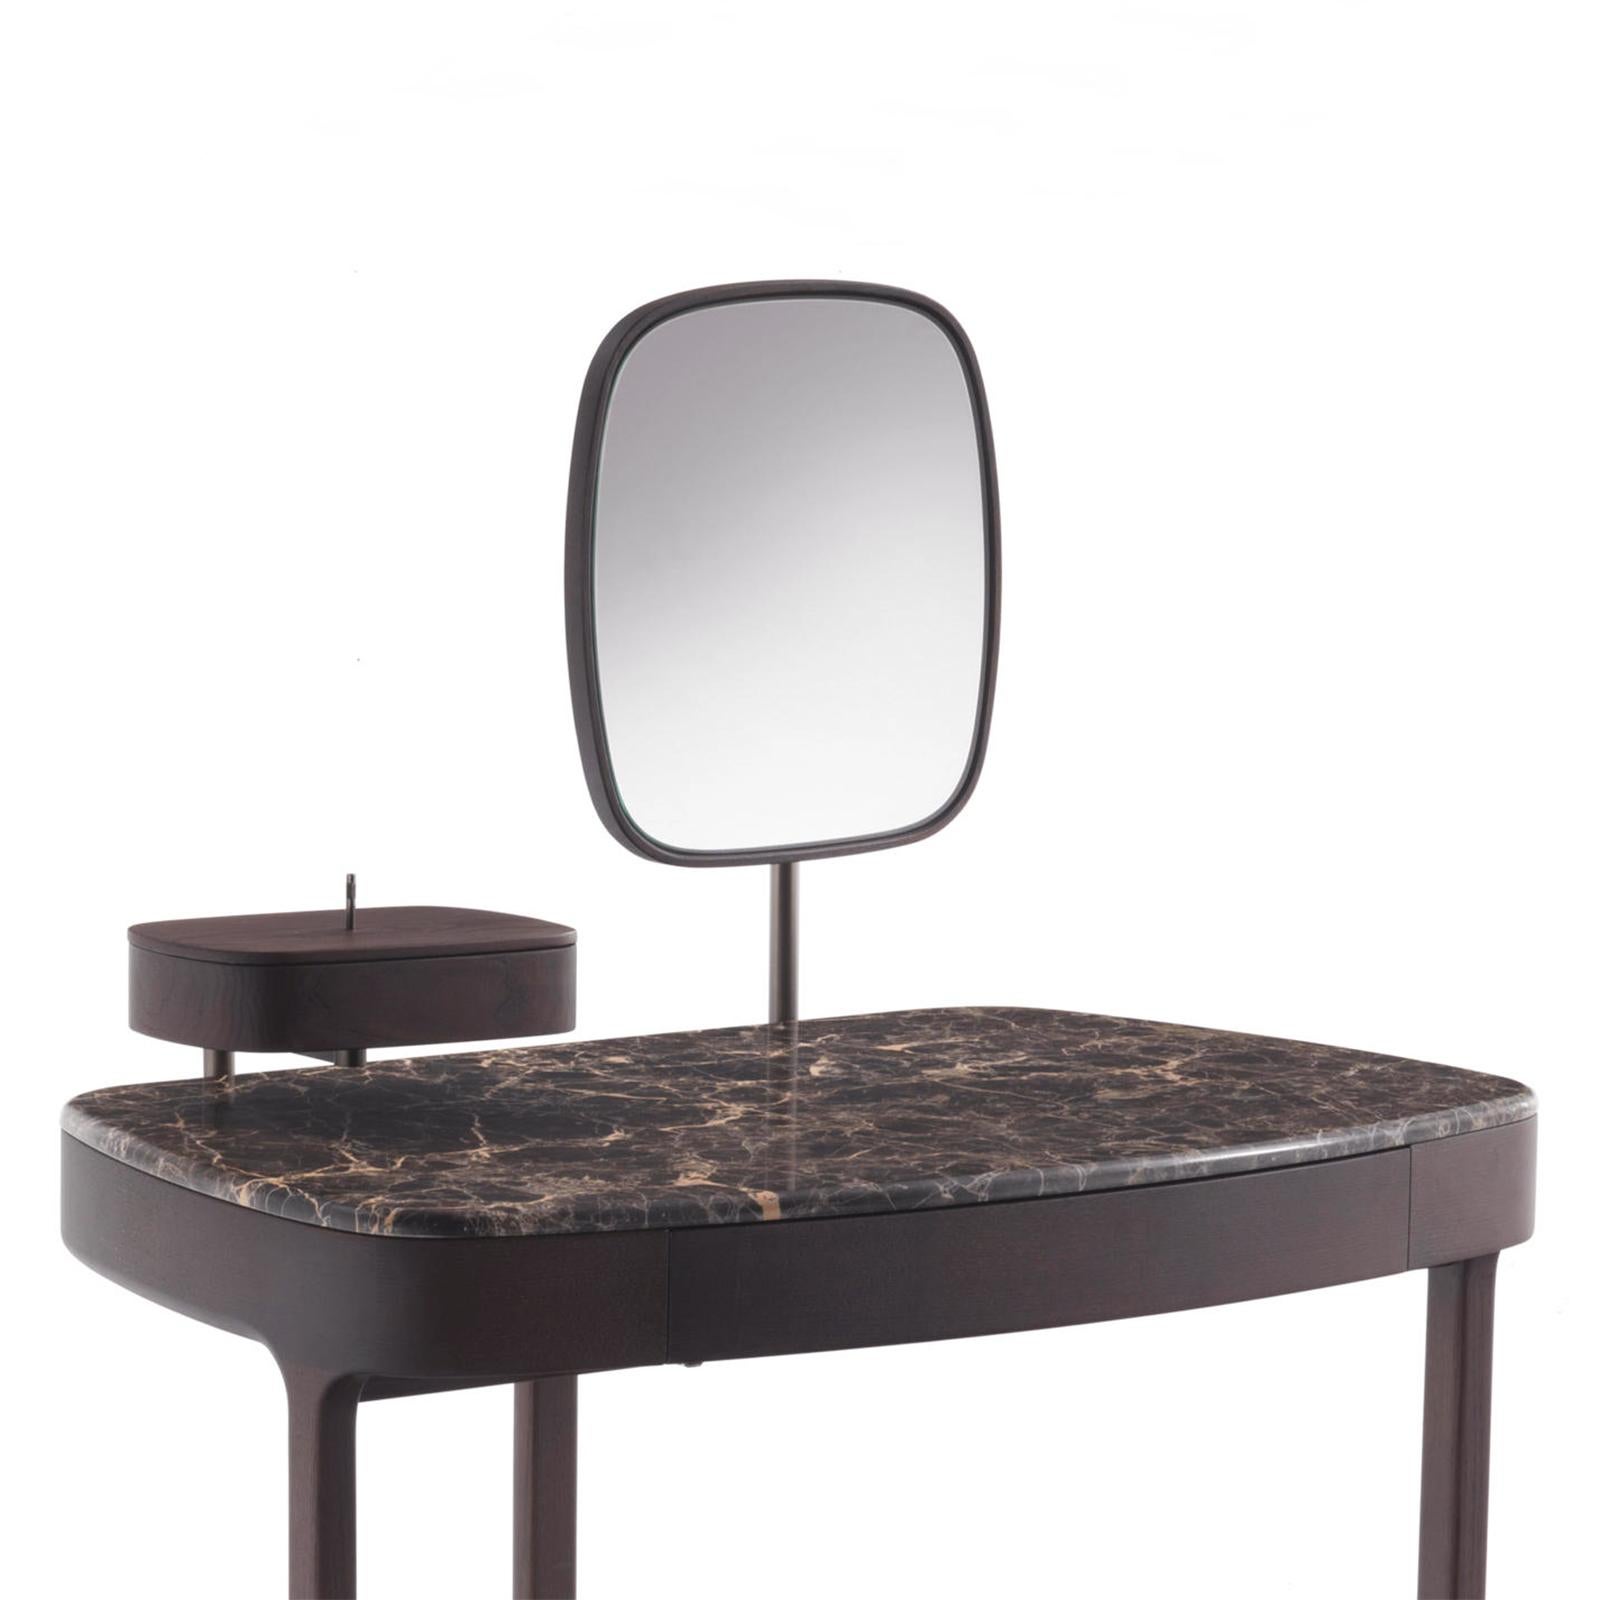 Coiffeuse and Stool Make-up Ash Stained Set with structures in solid
ash wood in moka stained finish for the coiffeuse, stool, mirror and drawers.
With top in emperador polished marble. Coiffeuse mirror glass with solid ash 
wood frame in moka